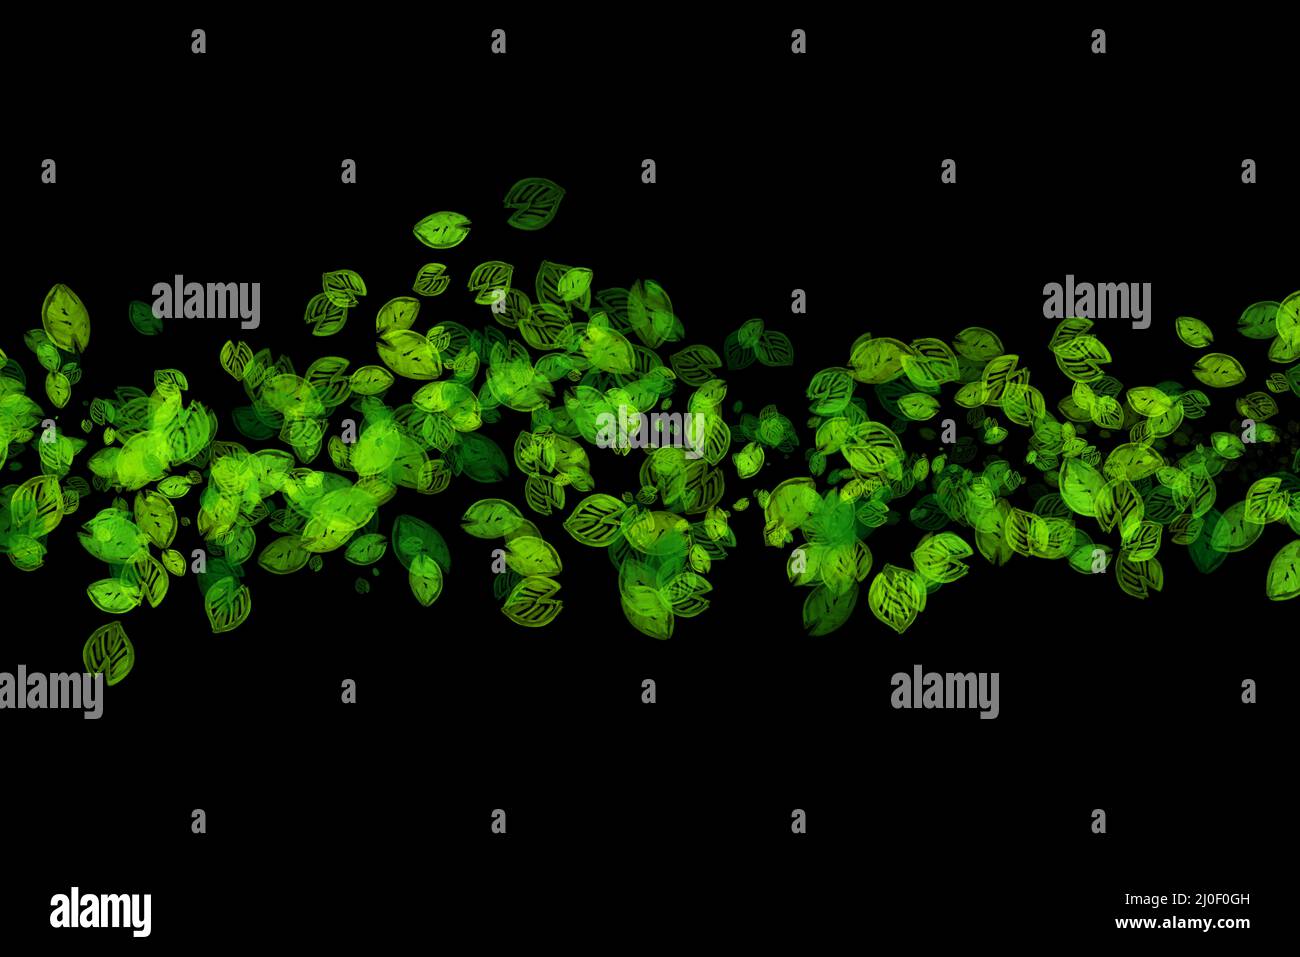 Abstract Eco fresh green field wavy line made of drawing leaves isolated on black background. Spring healthy illustration overla Stock Photo